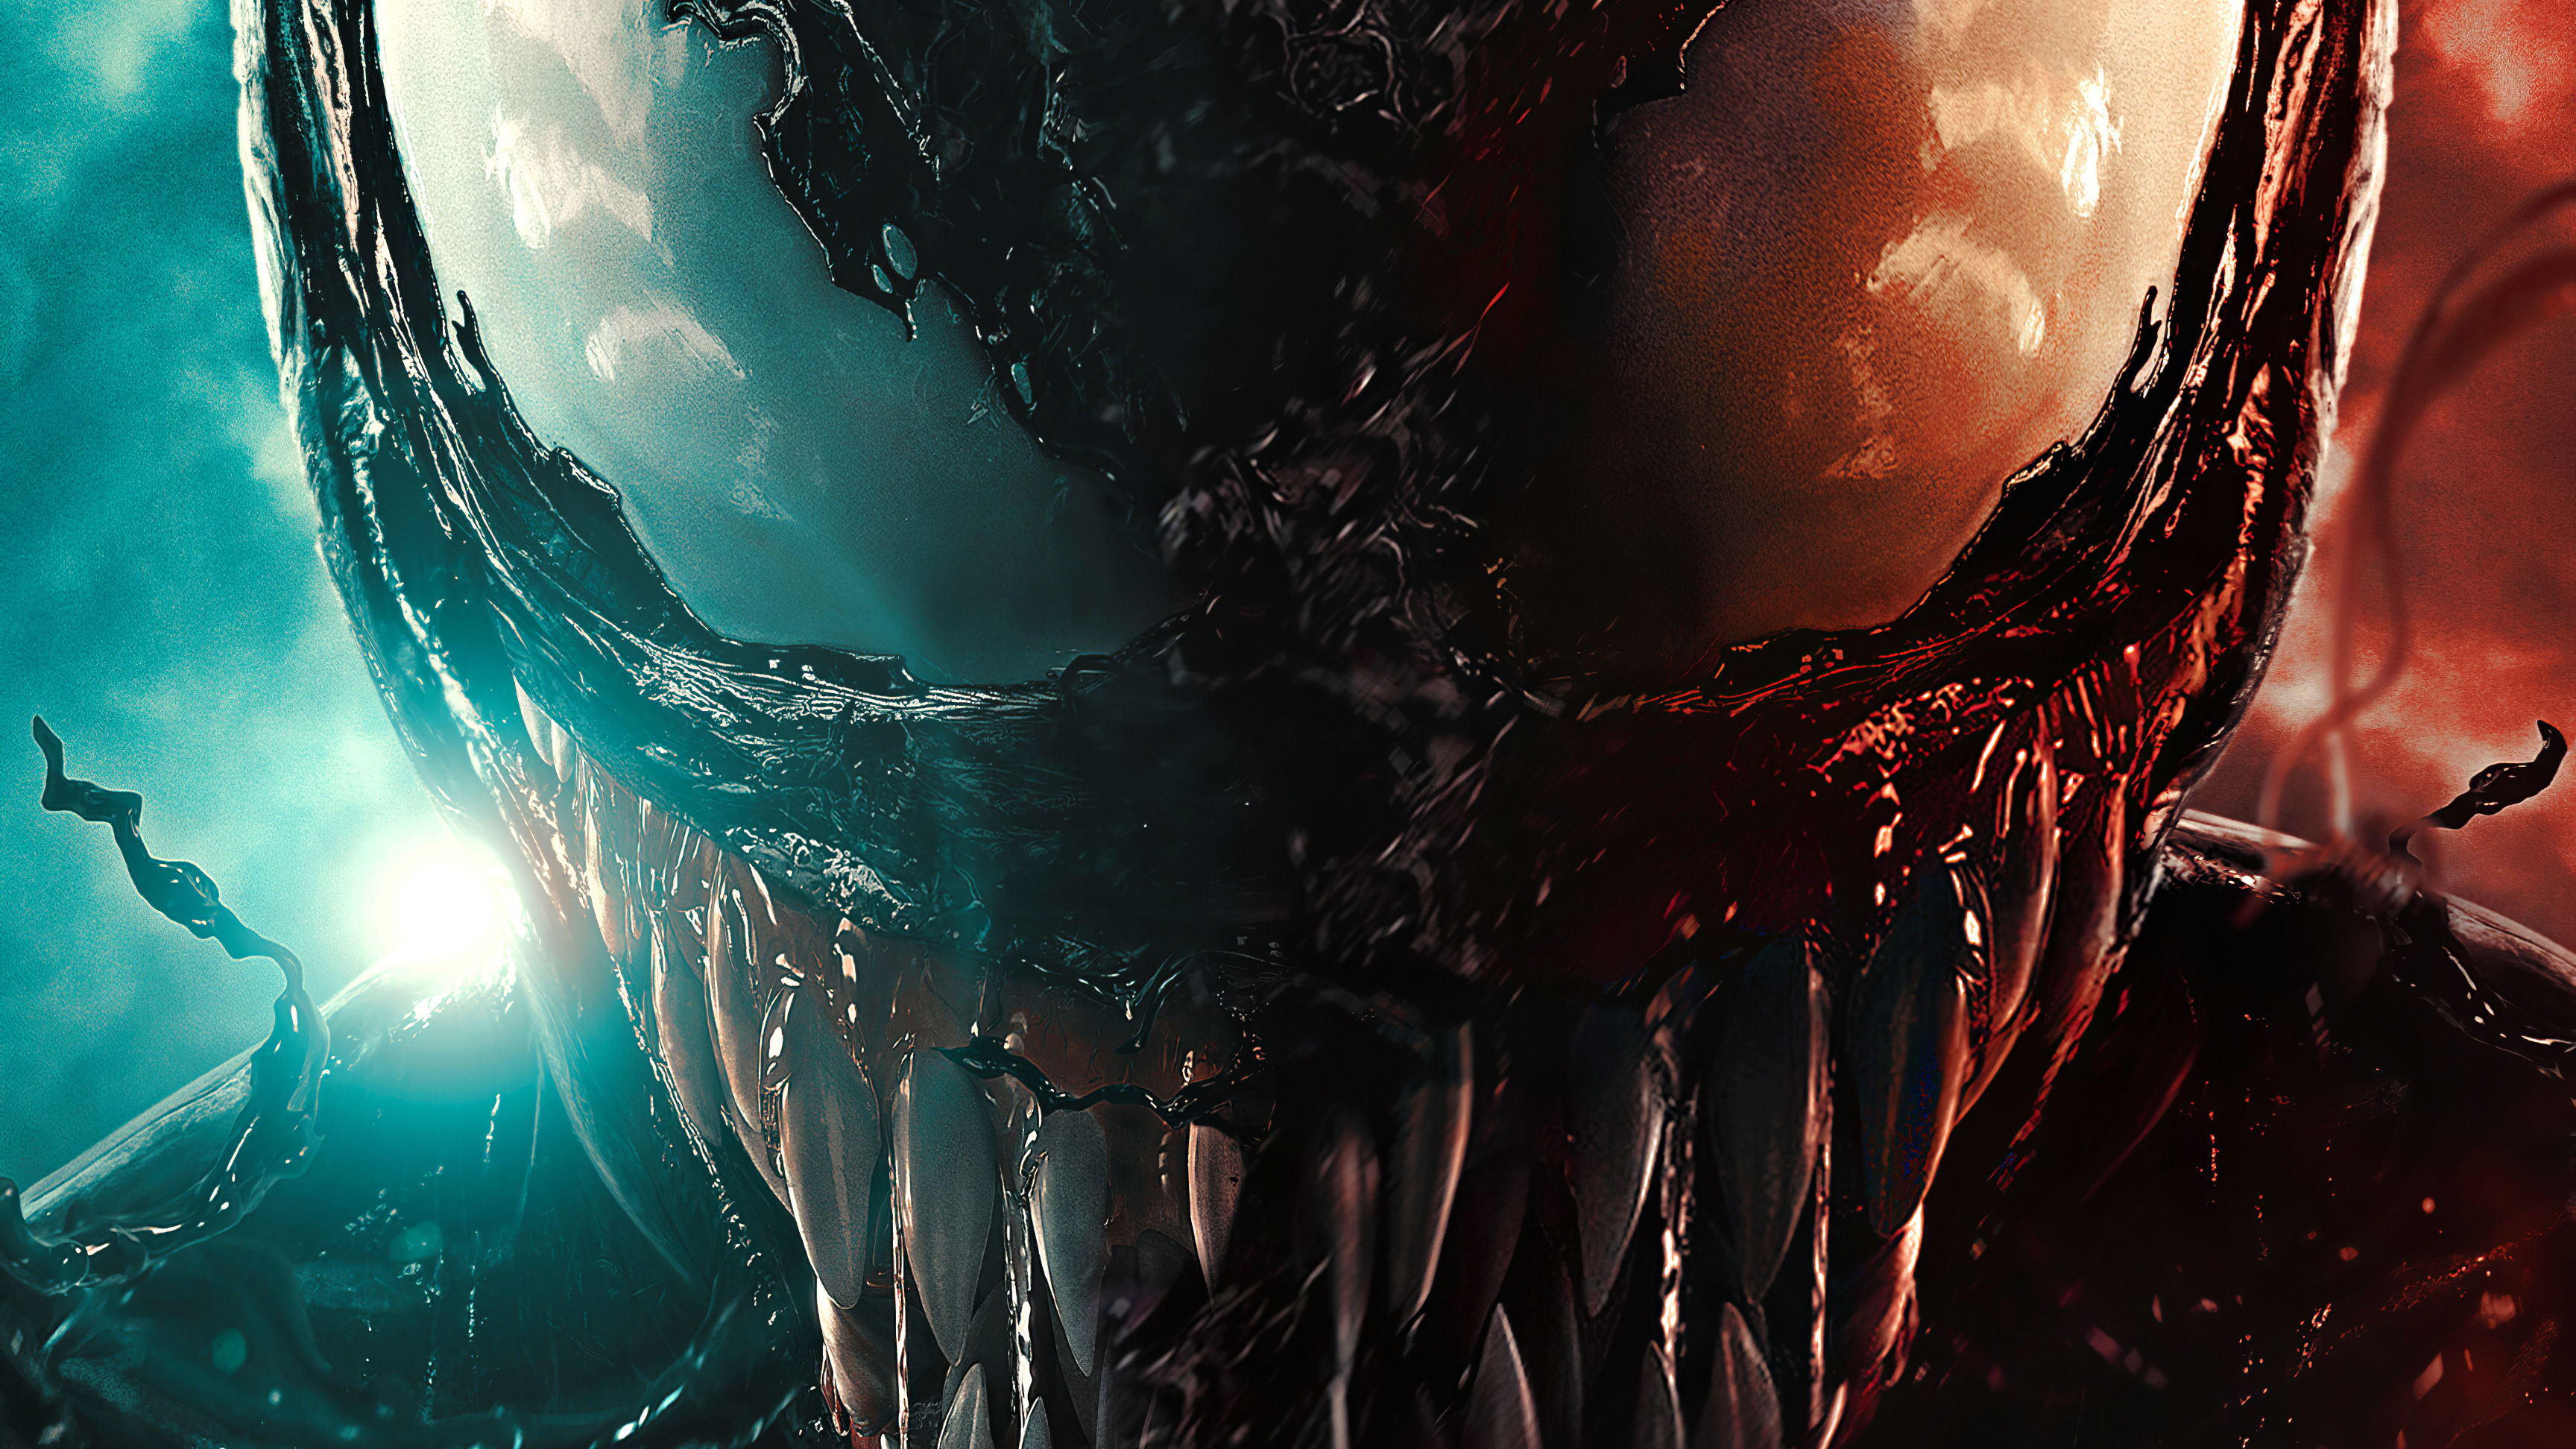 Tập tinVenom Let There Be Carnage VN posterjpg  Wikipedia tiếng Việt